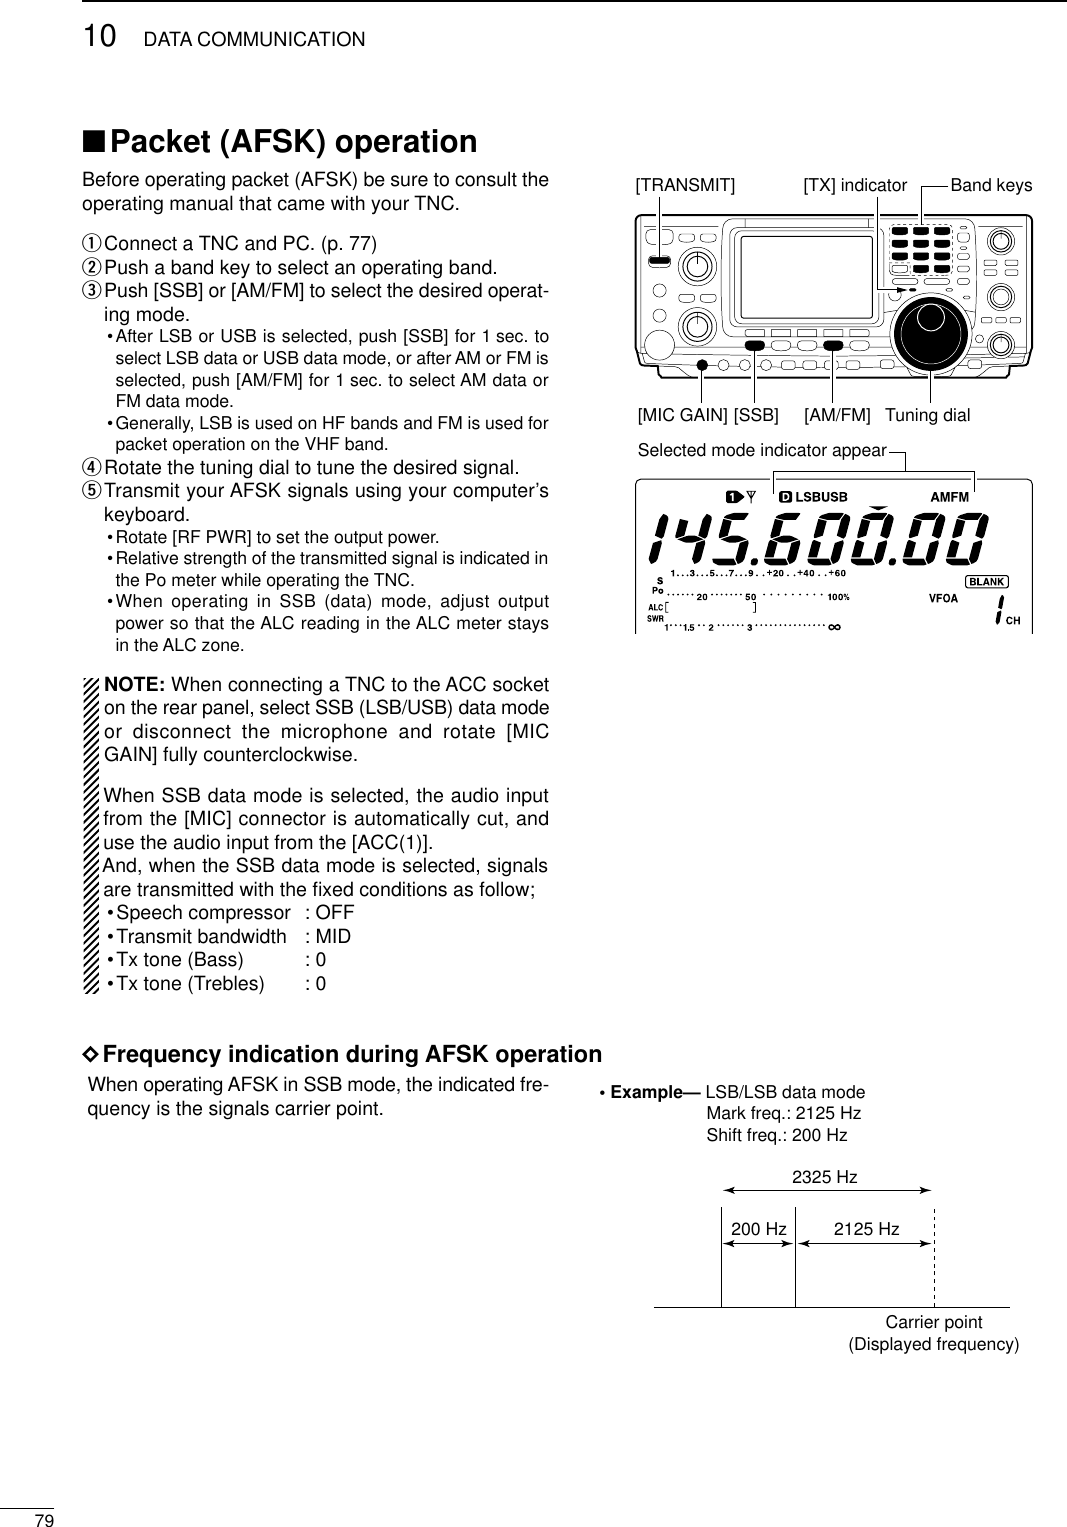 7910 DATA COMMUNICATION■Packet (AFSK) operationBefore operating packet (AFSK) be sure to consult theoperating manual that came with your TNC.qConnect a TNC and PC. (p. 77)wPush a band key to select an operating band.ePush [SSB] or [AM/FM] to select the desired operat-ing mode.•After LSB or USB is selected, push [SSB] for 1 sec. toselect LSB data or USB data mode, or after AM or FM isselected, push [AM/FM] for 1 sec. to select AM data orFM data mode.•Generally, LSB is used on HF bands and FM is used forpacket operation on the VHF band.rRotate the tuning dial to tune the desired signal.tTransmit your AFSK signals using your computer’skeyboard.•Rotate [RF PWR] to set the output power.•Relative strength of the transmitted signal is indicated inthe Po meter while operating the TNC.•When operating in SSB (data) mode, adjust outputpower so that the ALC reading in the ALC meter staysin the ALC zone.NOTE: When connecting a TNC to the ACC socketon the rear panel, select SSB (LSB/USB) data modeor disconnect the microphone and rotate [MICGAIN] fully counterclockwise.When SSB data mode is selected, the audio inputfrom the [MIC] connector is automatically cut, anduse the audio input from the [ACC(1)].And, when the SSB data mode is selected, signalsare transmitted with the ﬁxed conditions as follow;•Speech compressor : OFF•Transmit bandwidth : MID•Tx tone (Bass) : 0•Tx tone (Trebles) : 0DFrequency indication during AFSK operationWhen operating AFSK in SSB mode, the indicated fre-quency is the signals carrier point.Band keys[TX] indicator[TRANSMIT][MIC GAIN] [AM/FM] Tuning dialSelected mode indicator appear[SSB]• Example— LSB/LSB data modeMark freq.: 2125 HzShift freq.: 200 Hz2325 Hz200 Hz 2125 HzCarrier point(Displayed frequency)